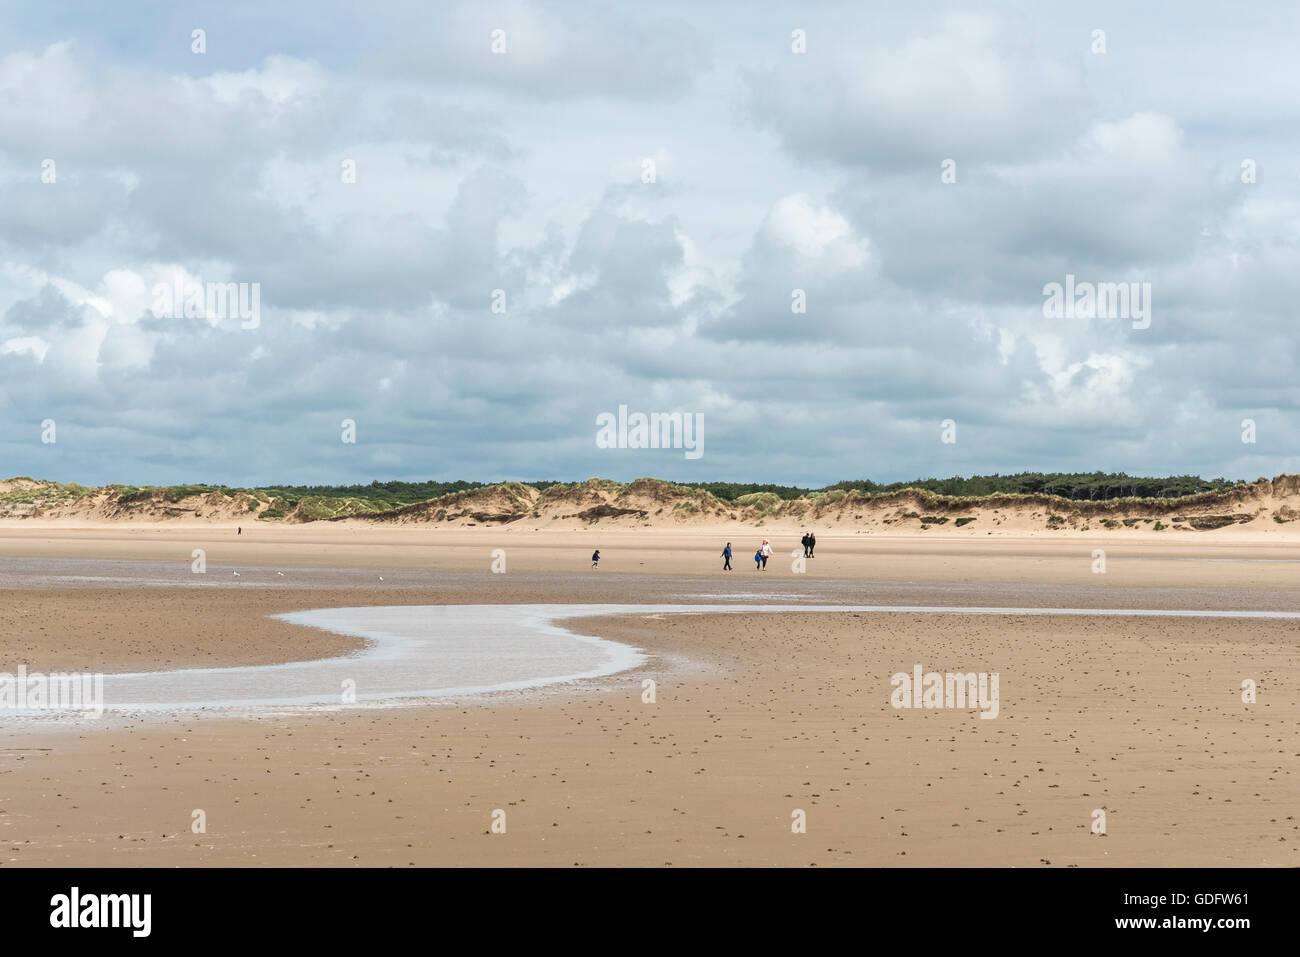 Figures on the beach at Formby point in Merseyside. Stock Photo